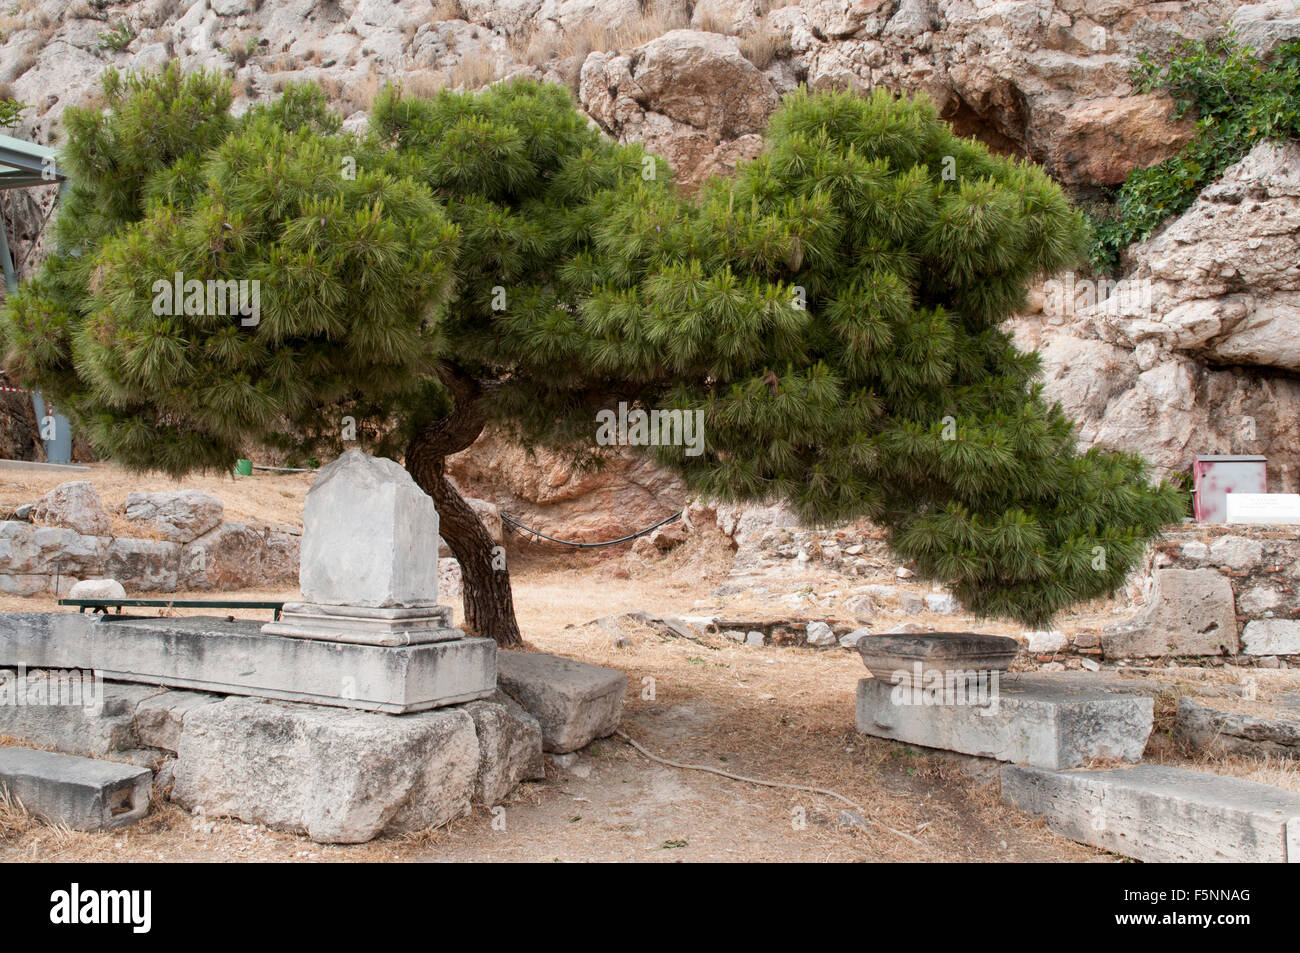 The Aleppo Pine is a very common tree in the Mediterranean like here in Athens.  Die Aleppo-Kiefer wächst häufig am Mittelmeer. Stock Photo